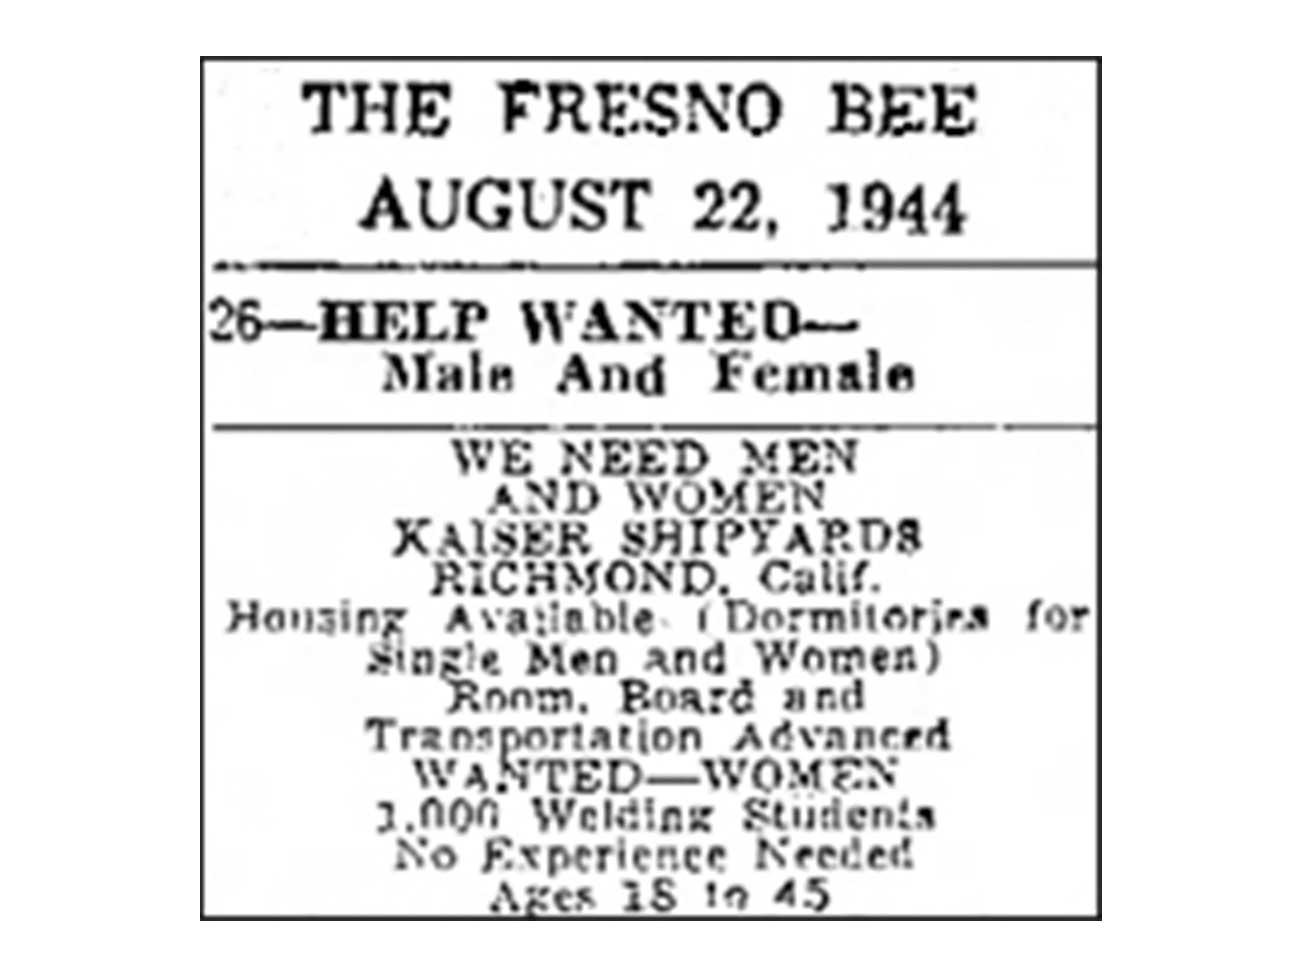 Women wanted ad in the Fresno Bee